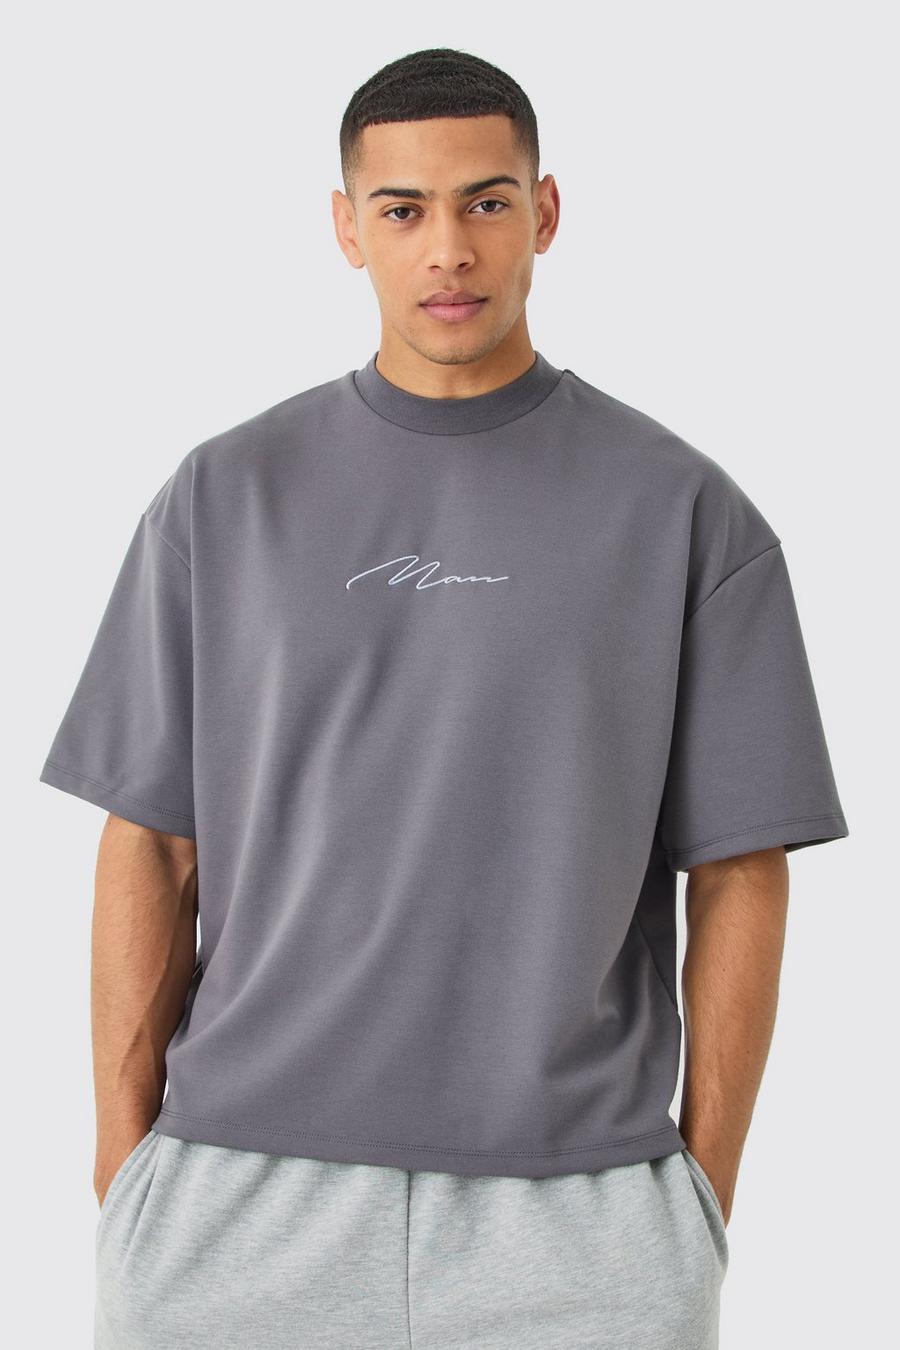 Charcoal Oversized Boxy Premium Super Heavyweight Embroidered T-shirt